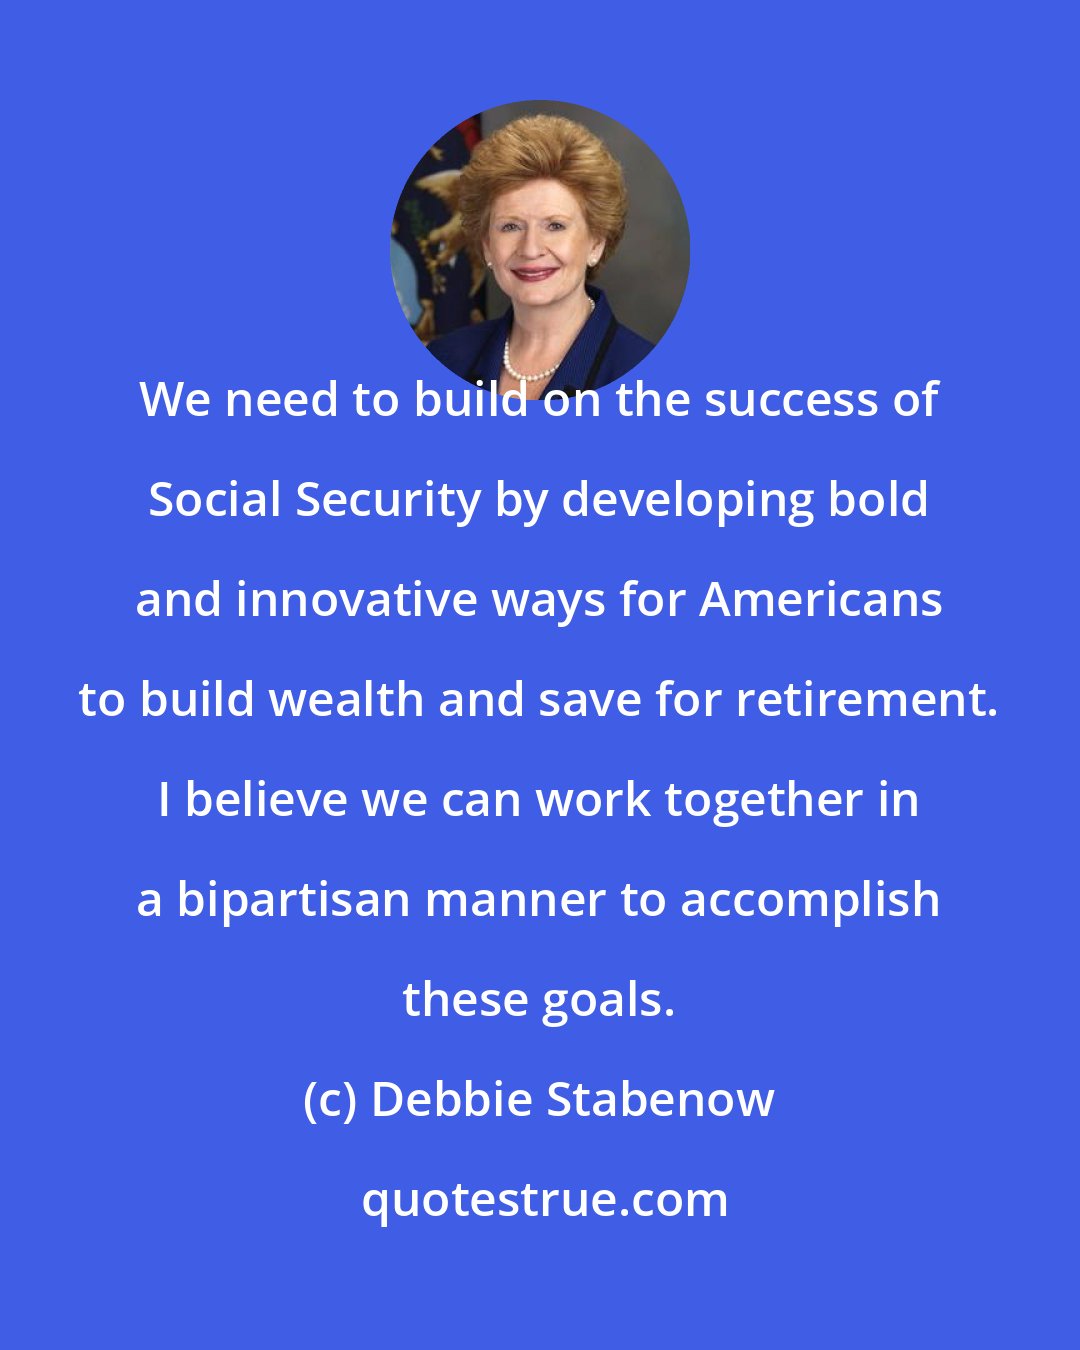 Debbie Stabenow: We need to build on the success of Social Security by developing bold and innovative ways for Americans to build wealth and save for retirement. I believe we can work together in a bipartisan manner to accomplish these goals.